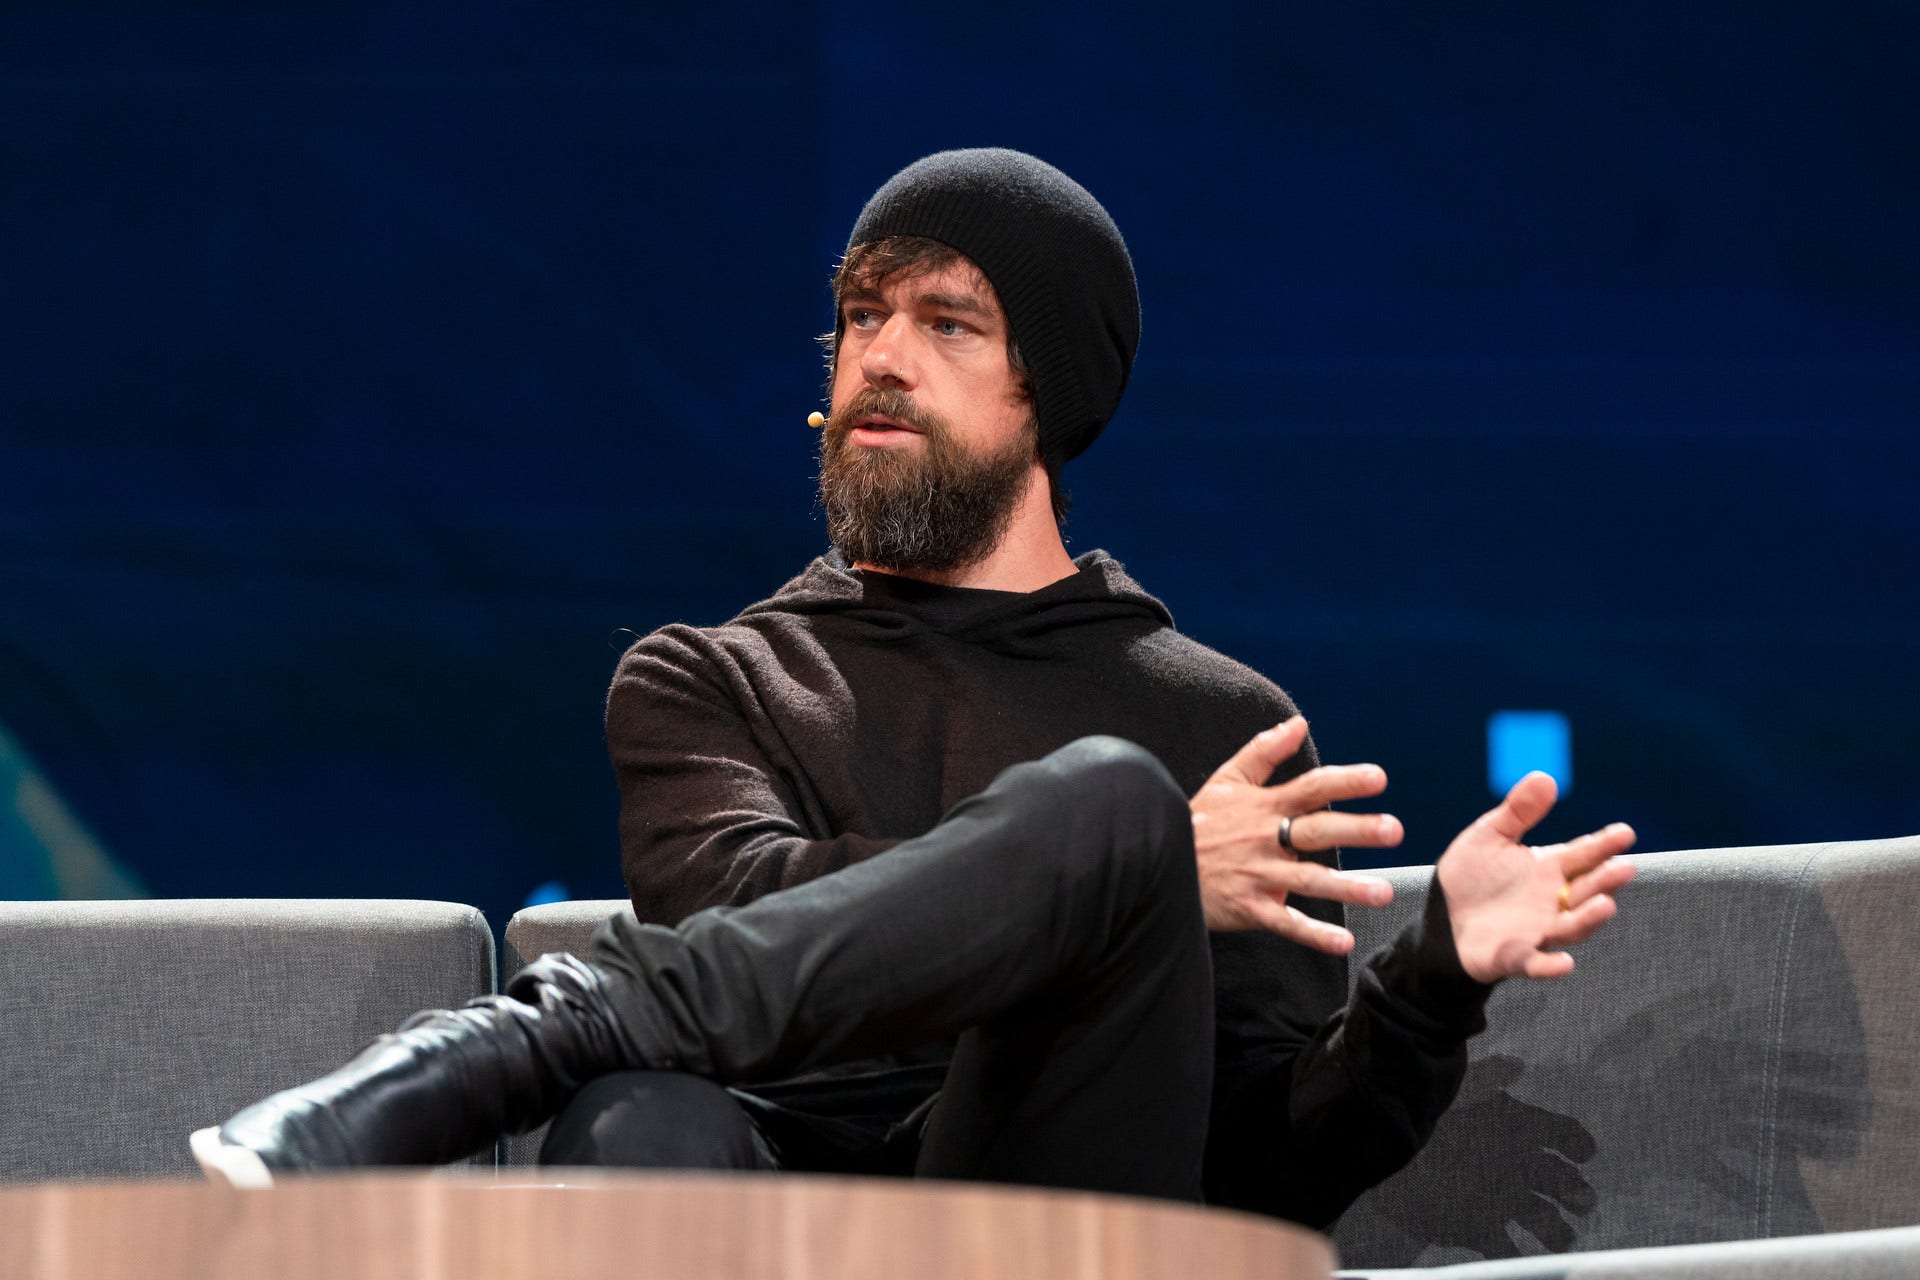 'Everything In Its Right Place:' Jack Dorsey Reacts To Elon Musk's Twitter Takeover